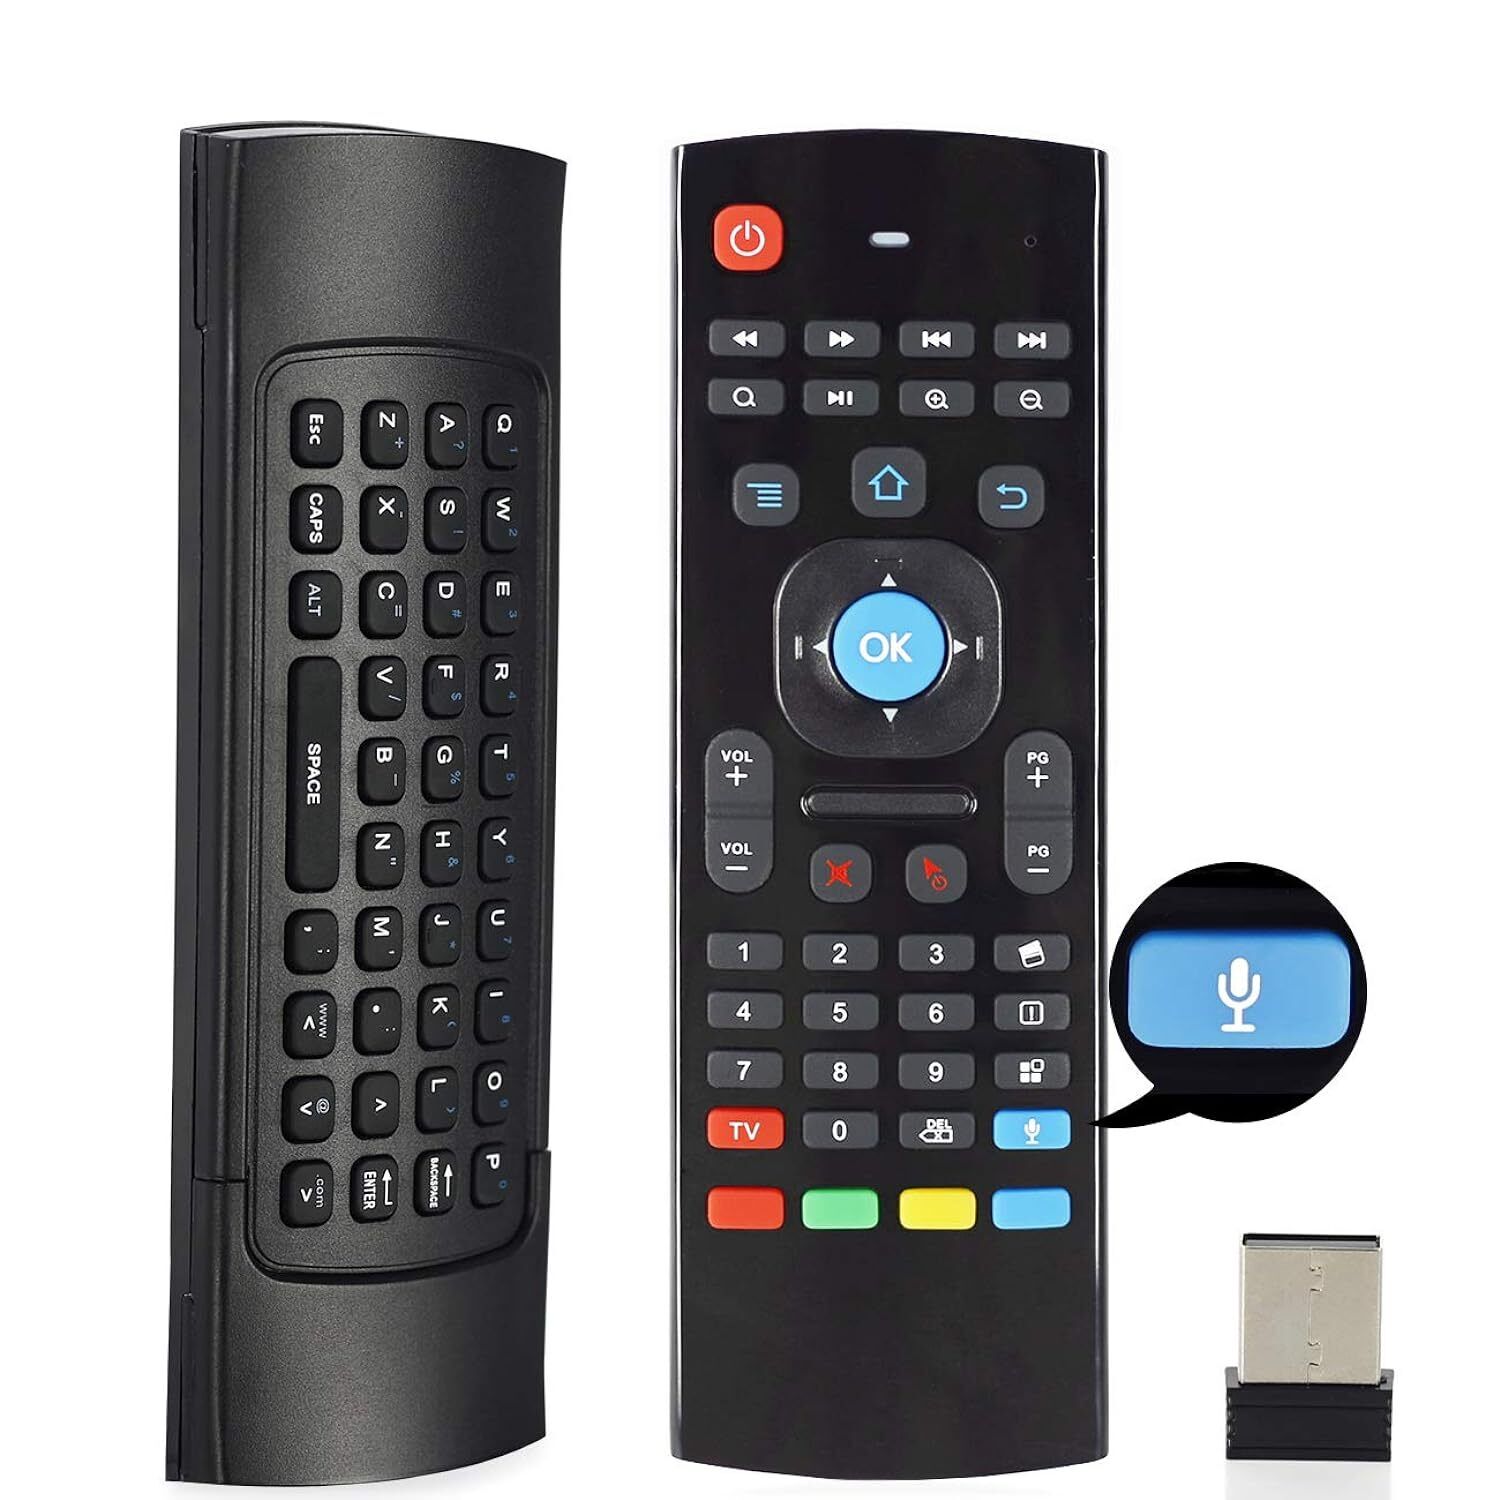 Mx3 Voice Air Mouse Mini Keyboard Wireless Remote, 2.4G Multifunctional Fly Mo